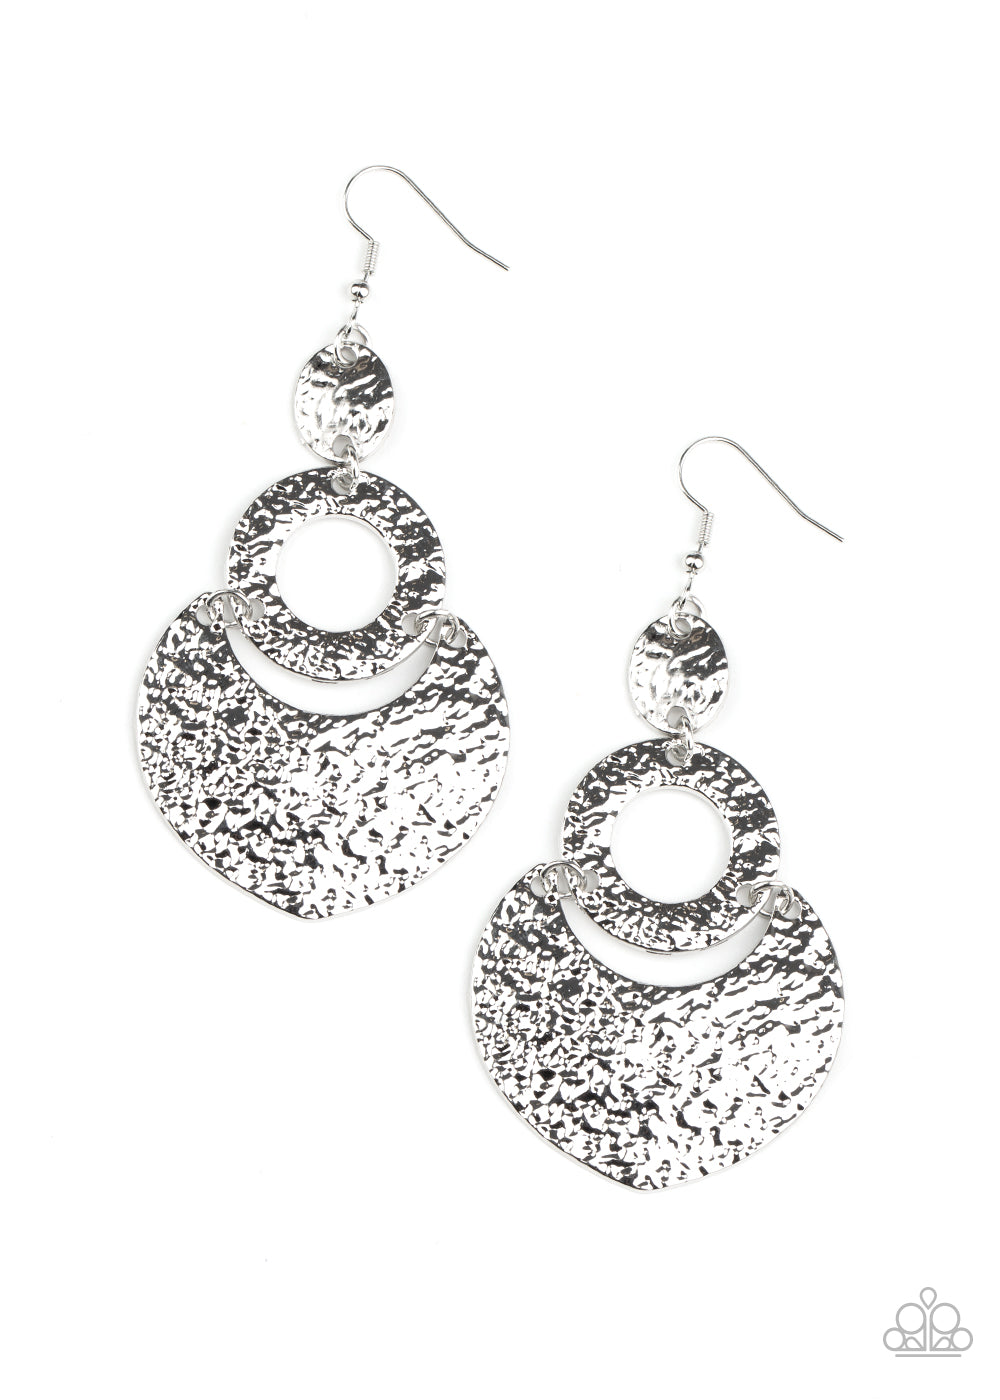 &lt;P&gt;Hammered and embossed in shimmery textures, oval, hoop, and crescent silver frames link into a blinding lure. Earring attaches to a standard fishhook fitting.&lt;/P&gt;  

&lt;P&gt; &lt;I&gt;  Sold as one pair of earrings. &lt;/I&gt;  &lt;/P&gt;

&lt;img src=\&quot;https://d9b54x484lq62.cloudfront.net/paparazzi/shopping/images/517_tag150x115_1.png\&quot; alt=\&quot;New Kit\&quot; align=\&quot;middle\&quot; height=\&quot;50\&quot; width=\&quot;50\&quot;/&gt;